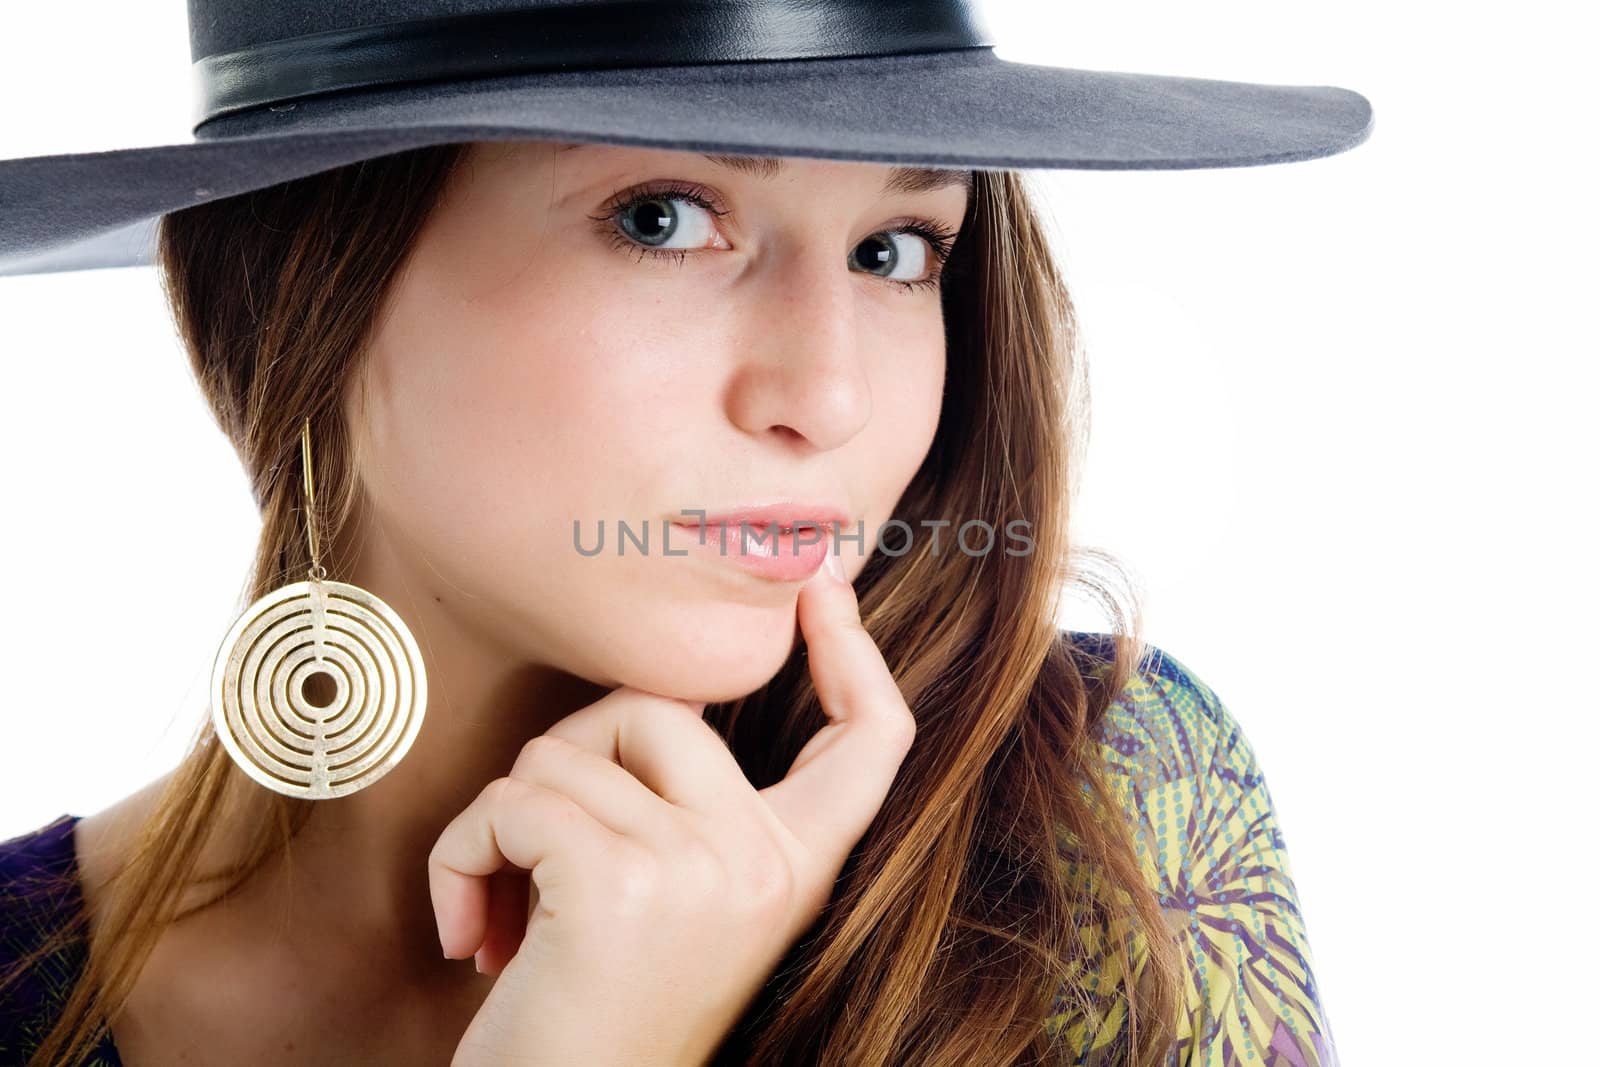 An image of a young girl in a grey hat